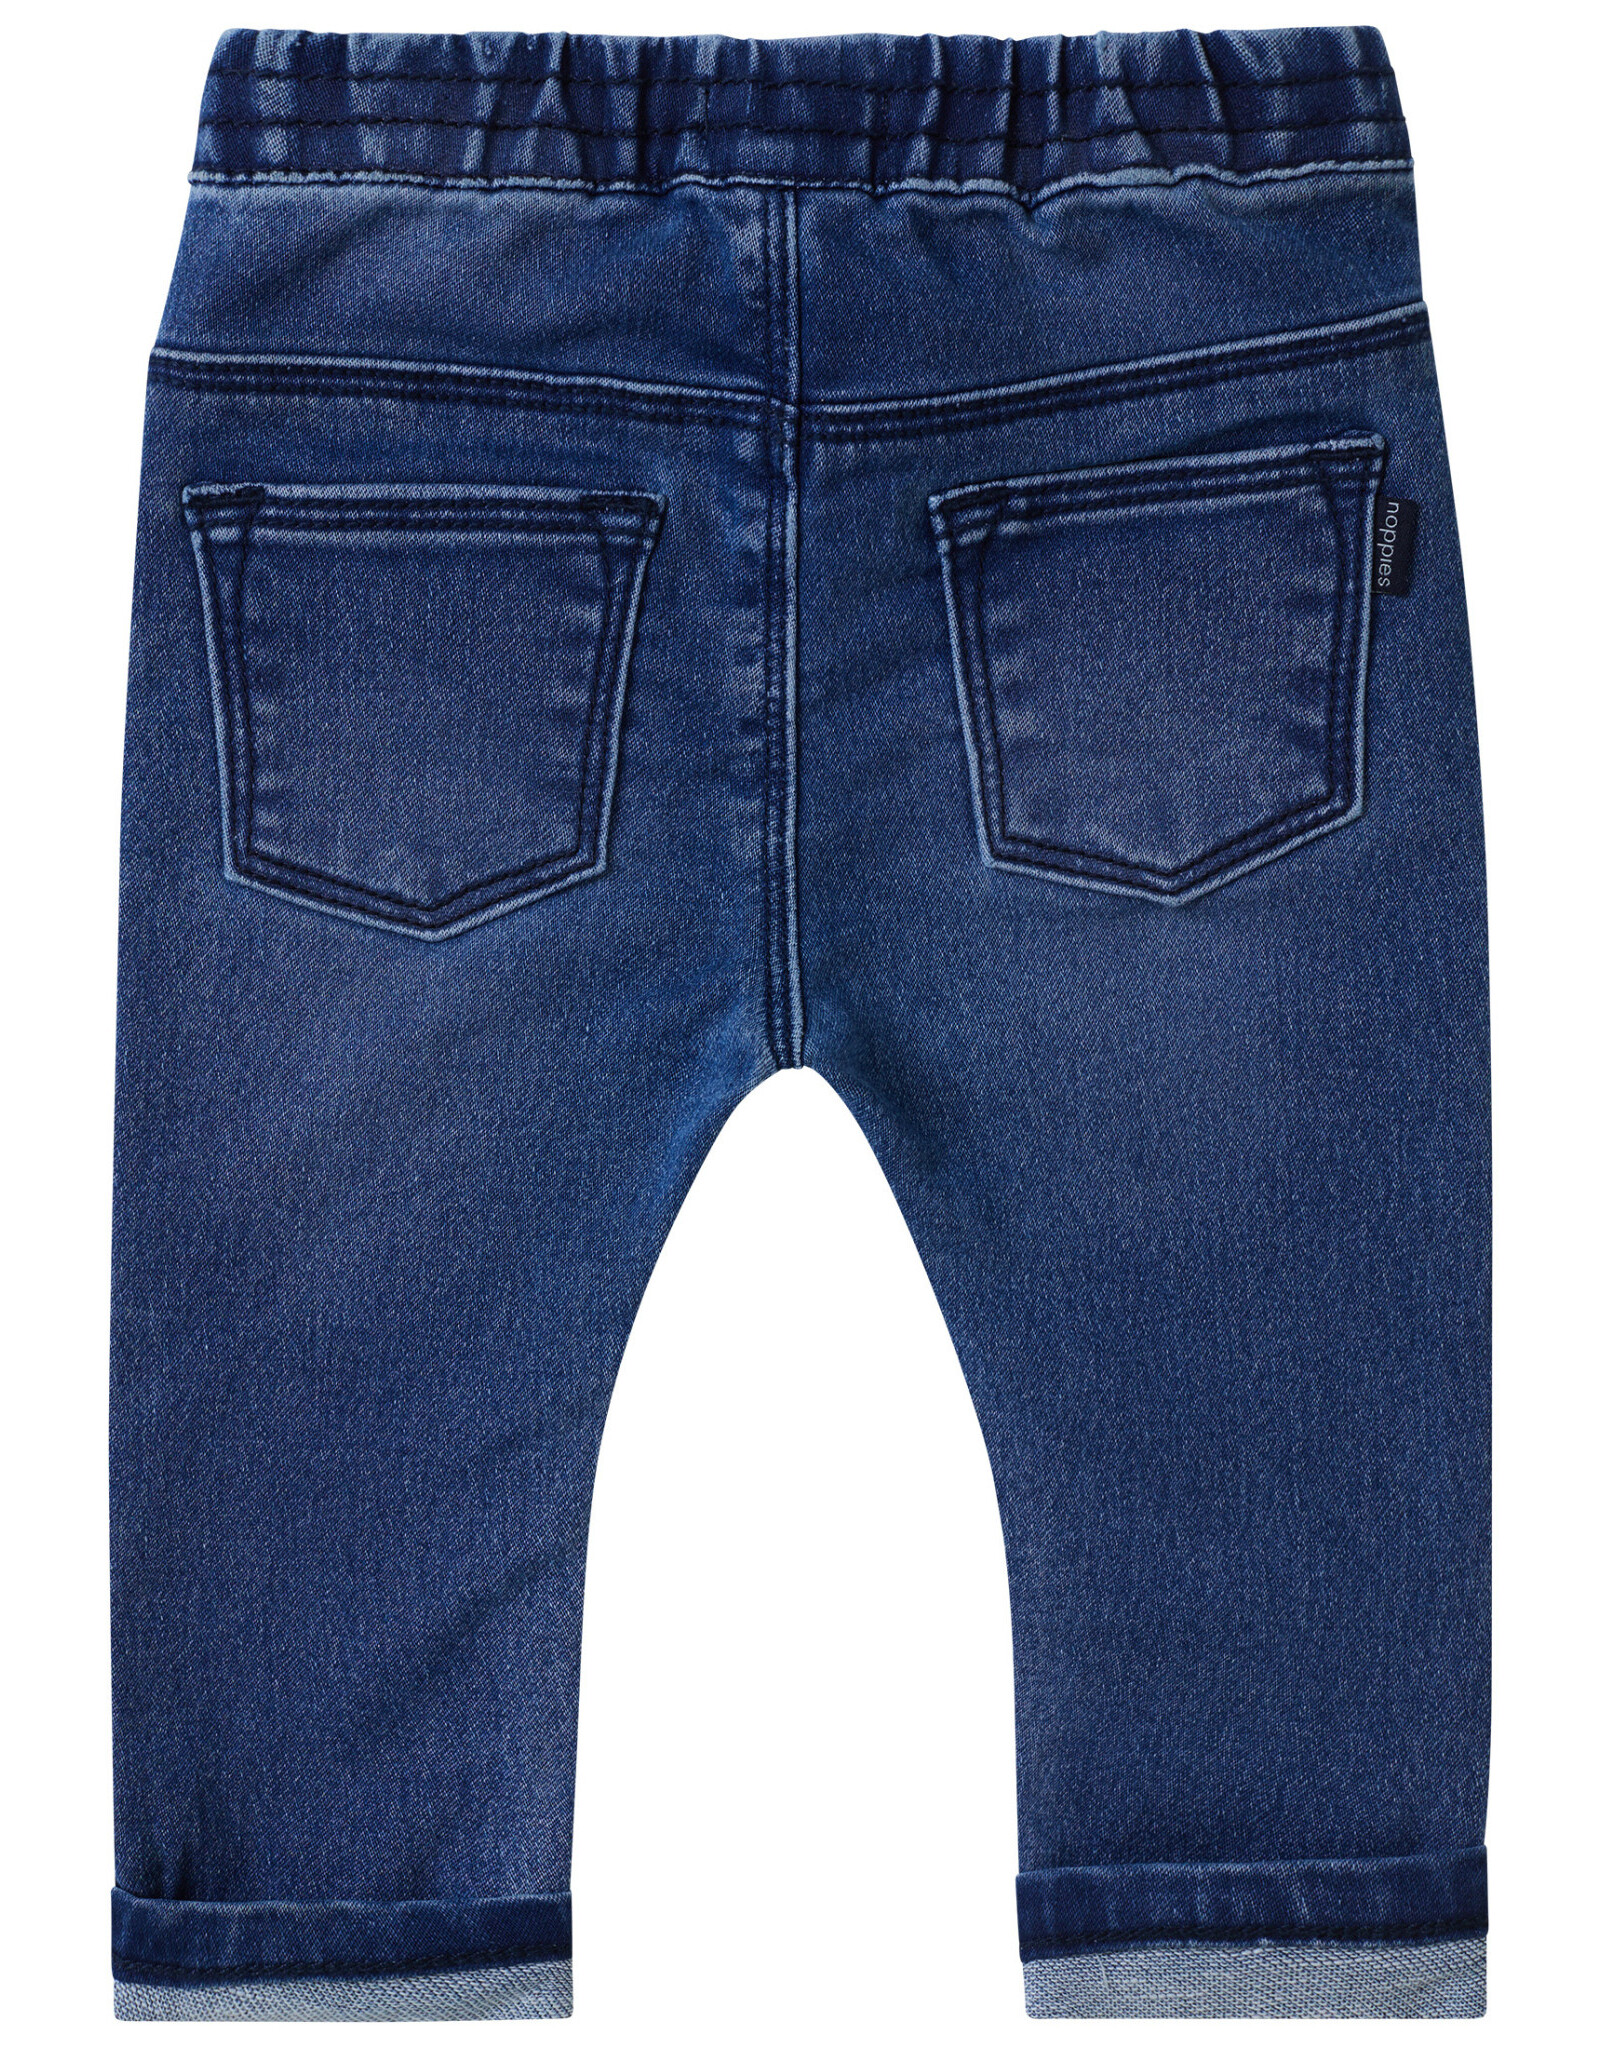 Noppies Boys denim pants Tappan relaxed fit Vintage Blue